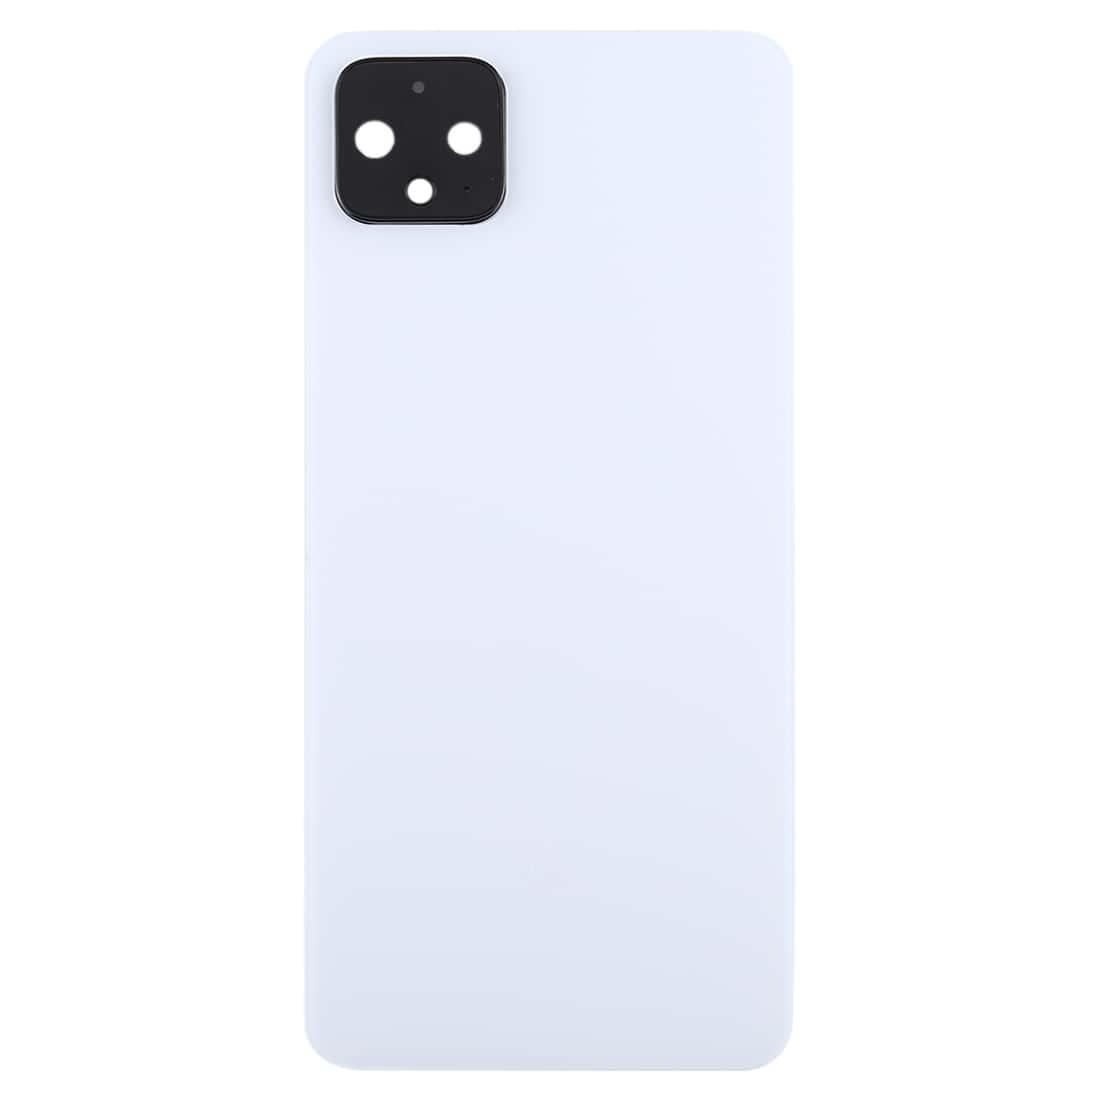 Back Glass Panel for Google Pixel 4 White with Camera Lens